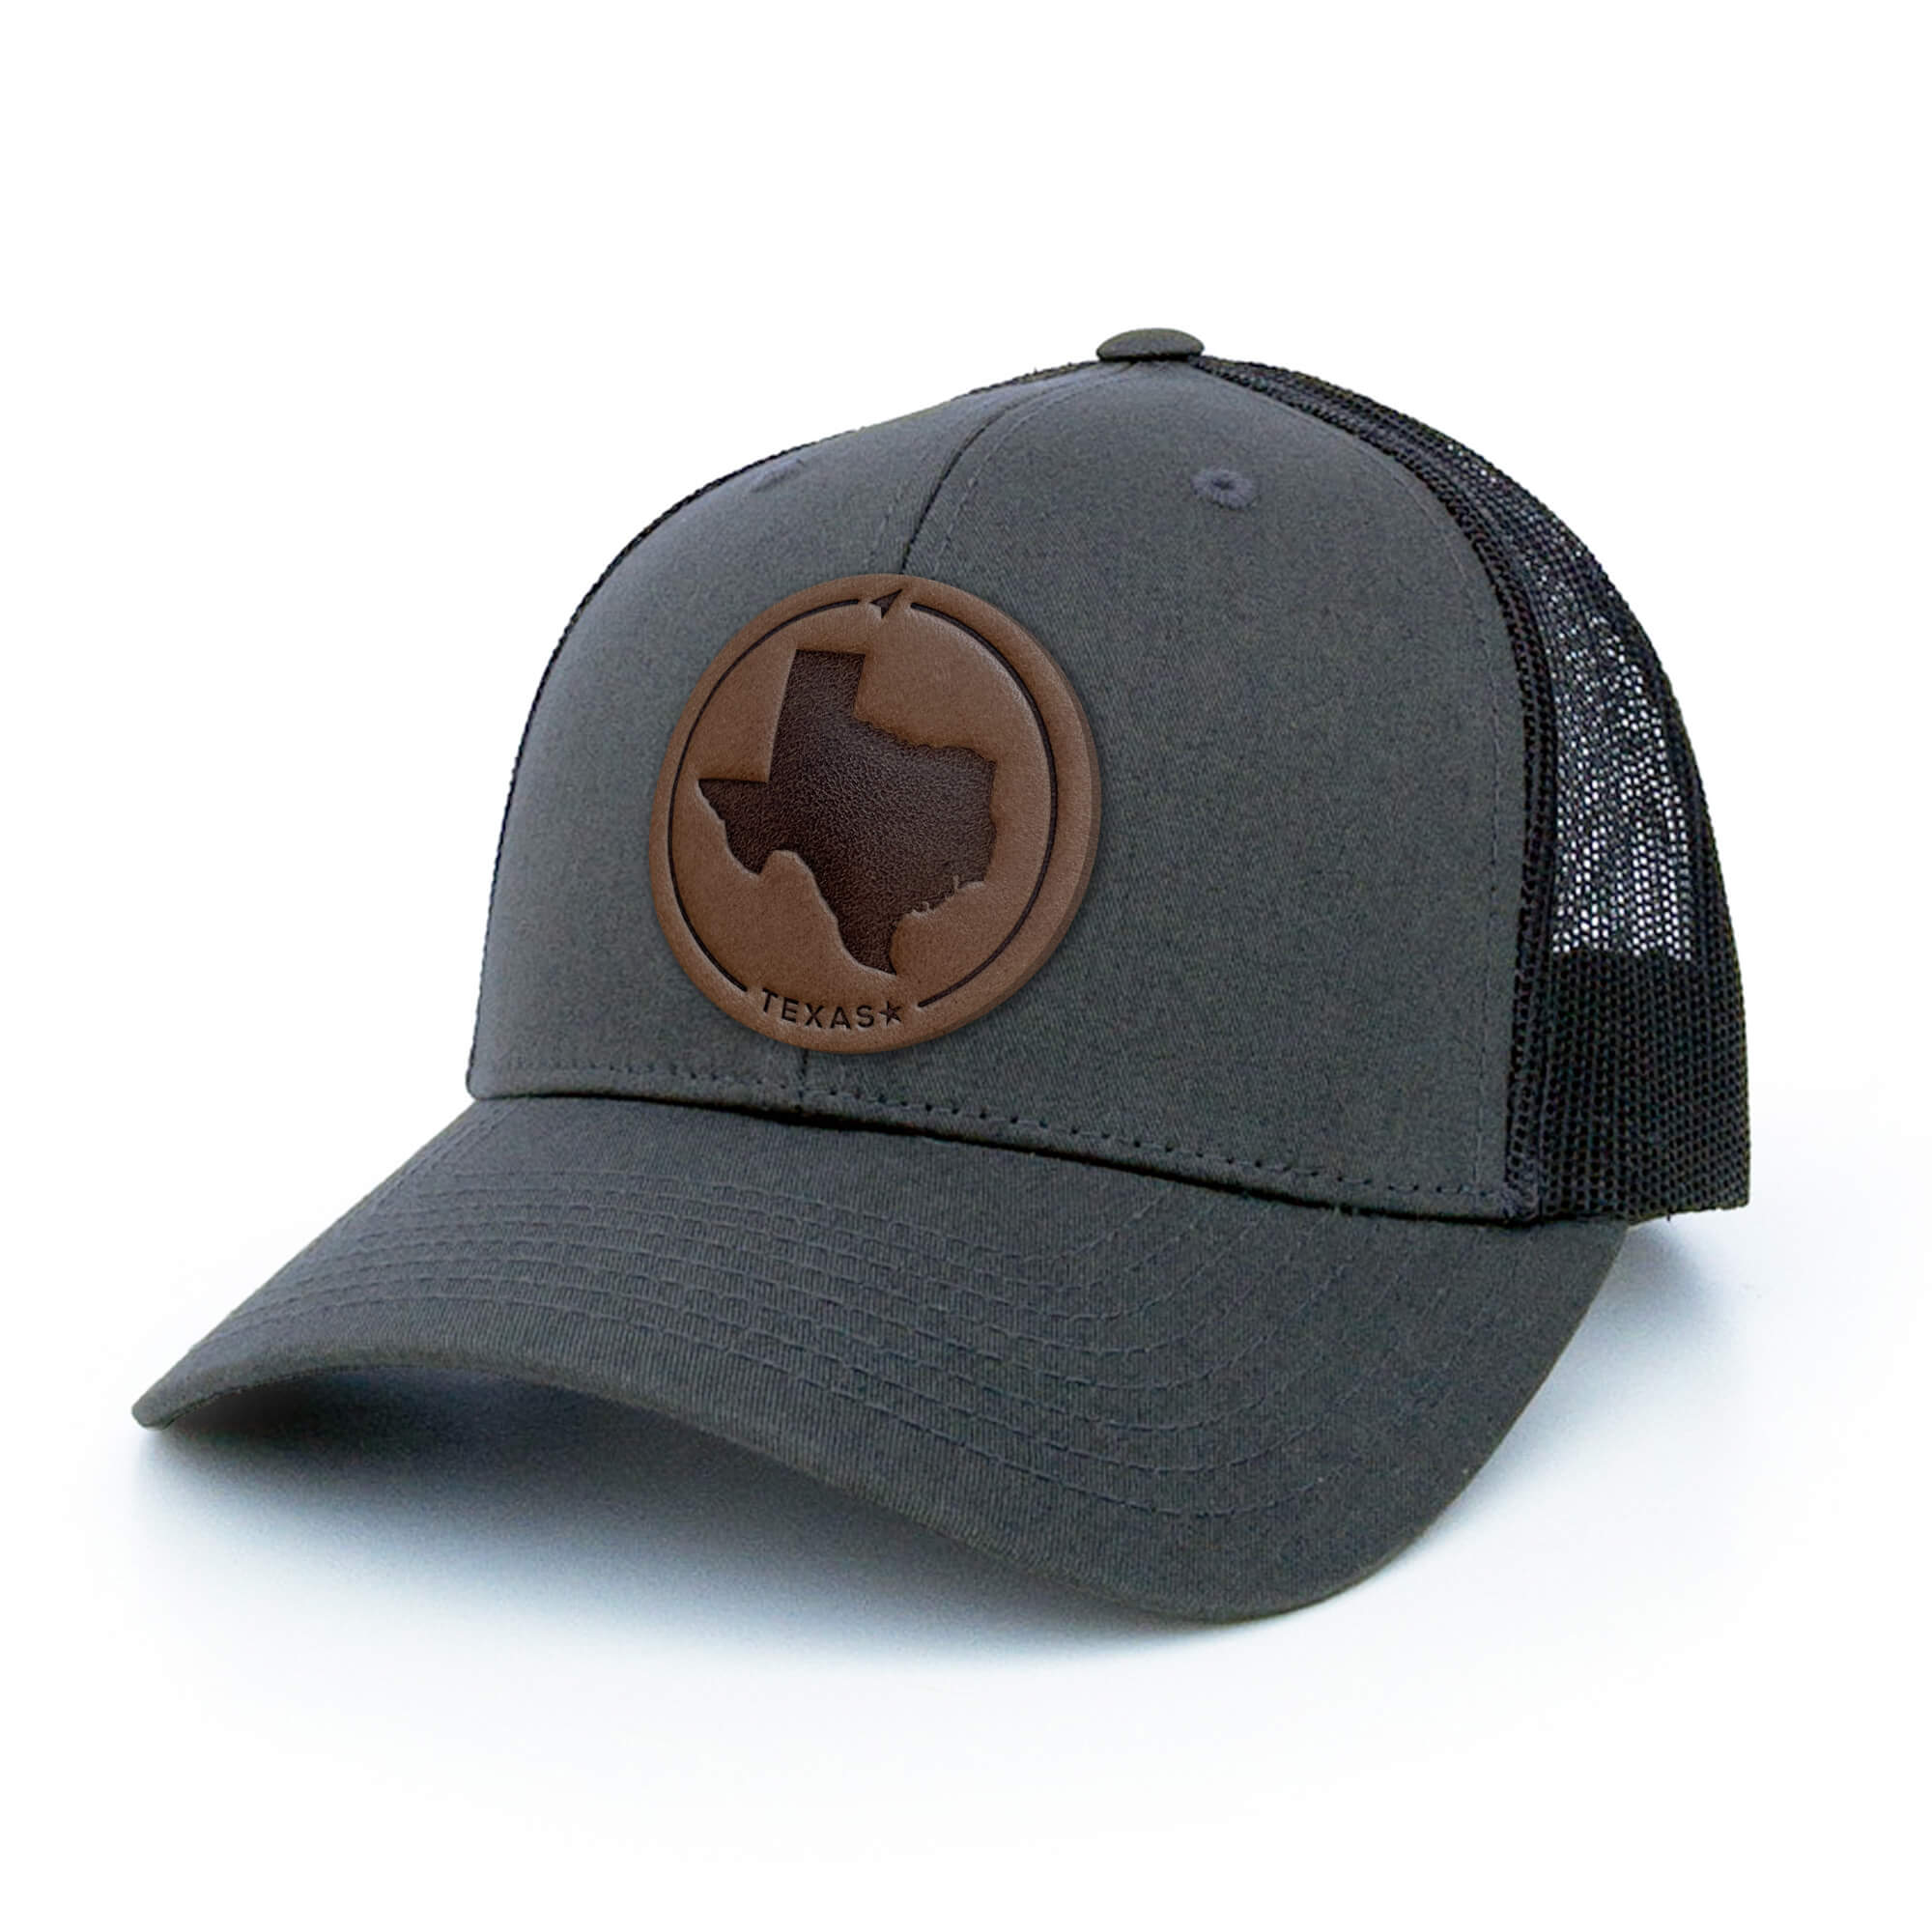 Charcoal trucker hat with full-grain leather patch of Texas | BLACK-003-002, CHARC-003-002, NAVY-003-002, HGREY-003-002, MOSS-003-002, BROWN-003-002